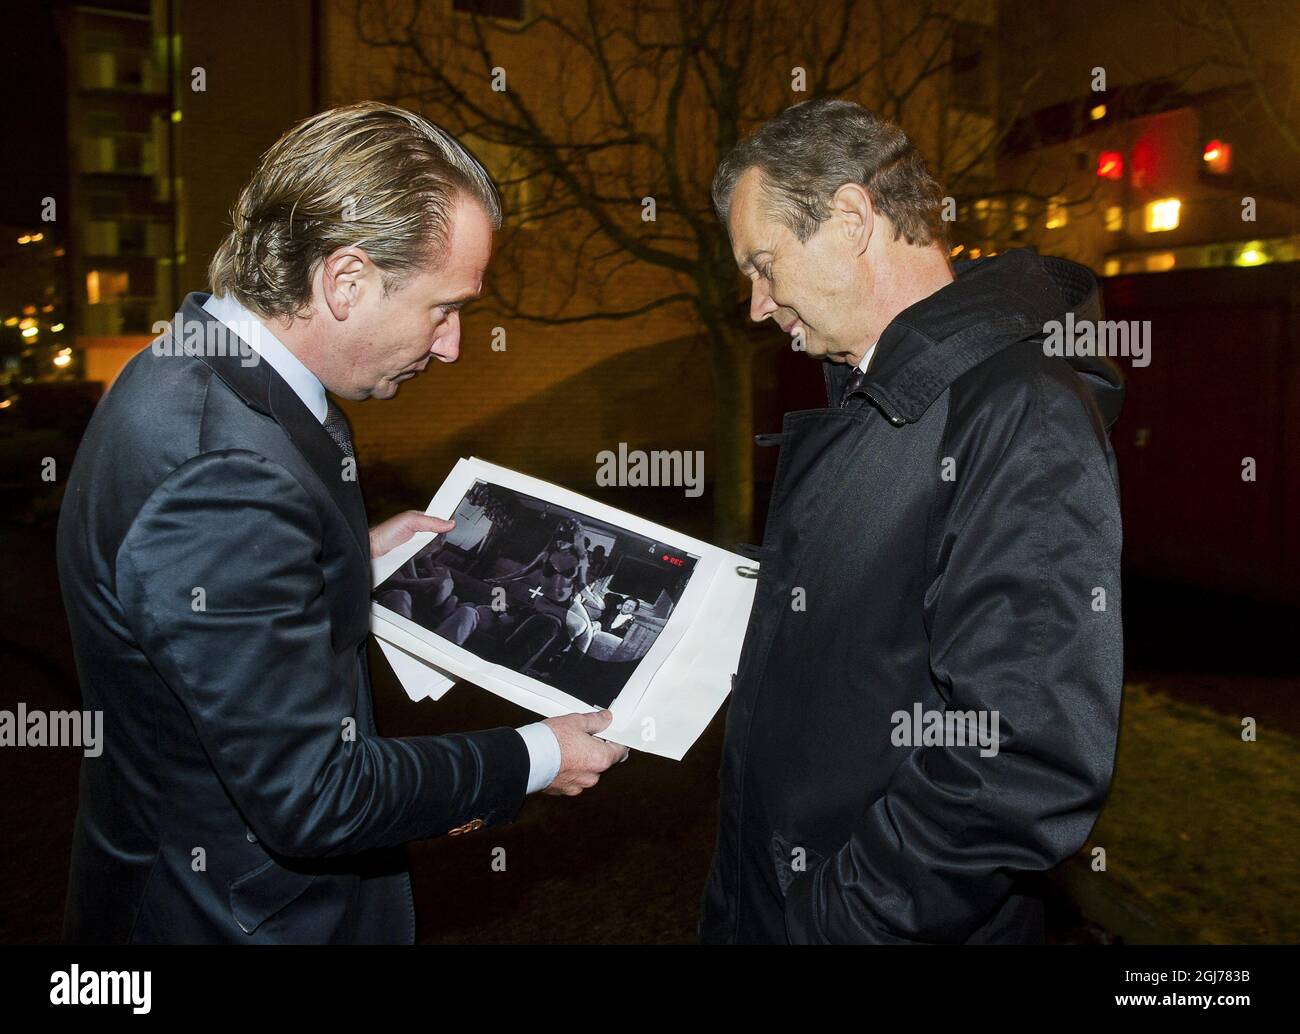 Newspaper Expressen´s reporter Johan T Lindwall (L) shows the picture for Bertil Ternert (R) Information Chief of the Royal Court in Stockholm. Swedish News paper Expressen today published the controversial picture allegedly of King Carl Gustaf and scantily clad women. Foto: Suvad Mrkonjic / XP / SCANPIX SWEDEN / kod 7116 ** OUT SWEDEN OUT ** Stock Photo